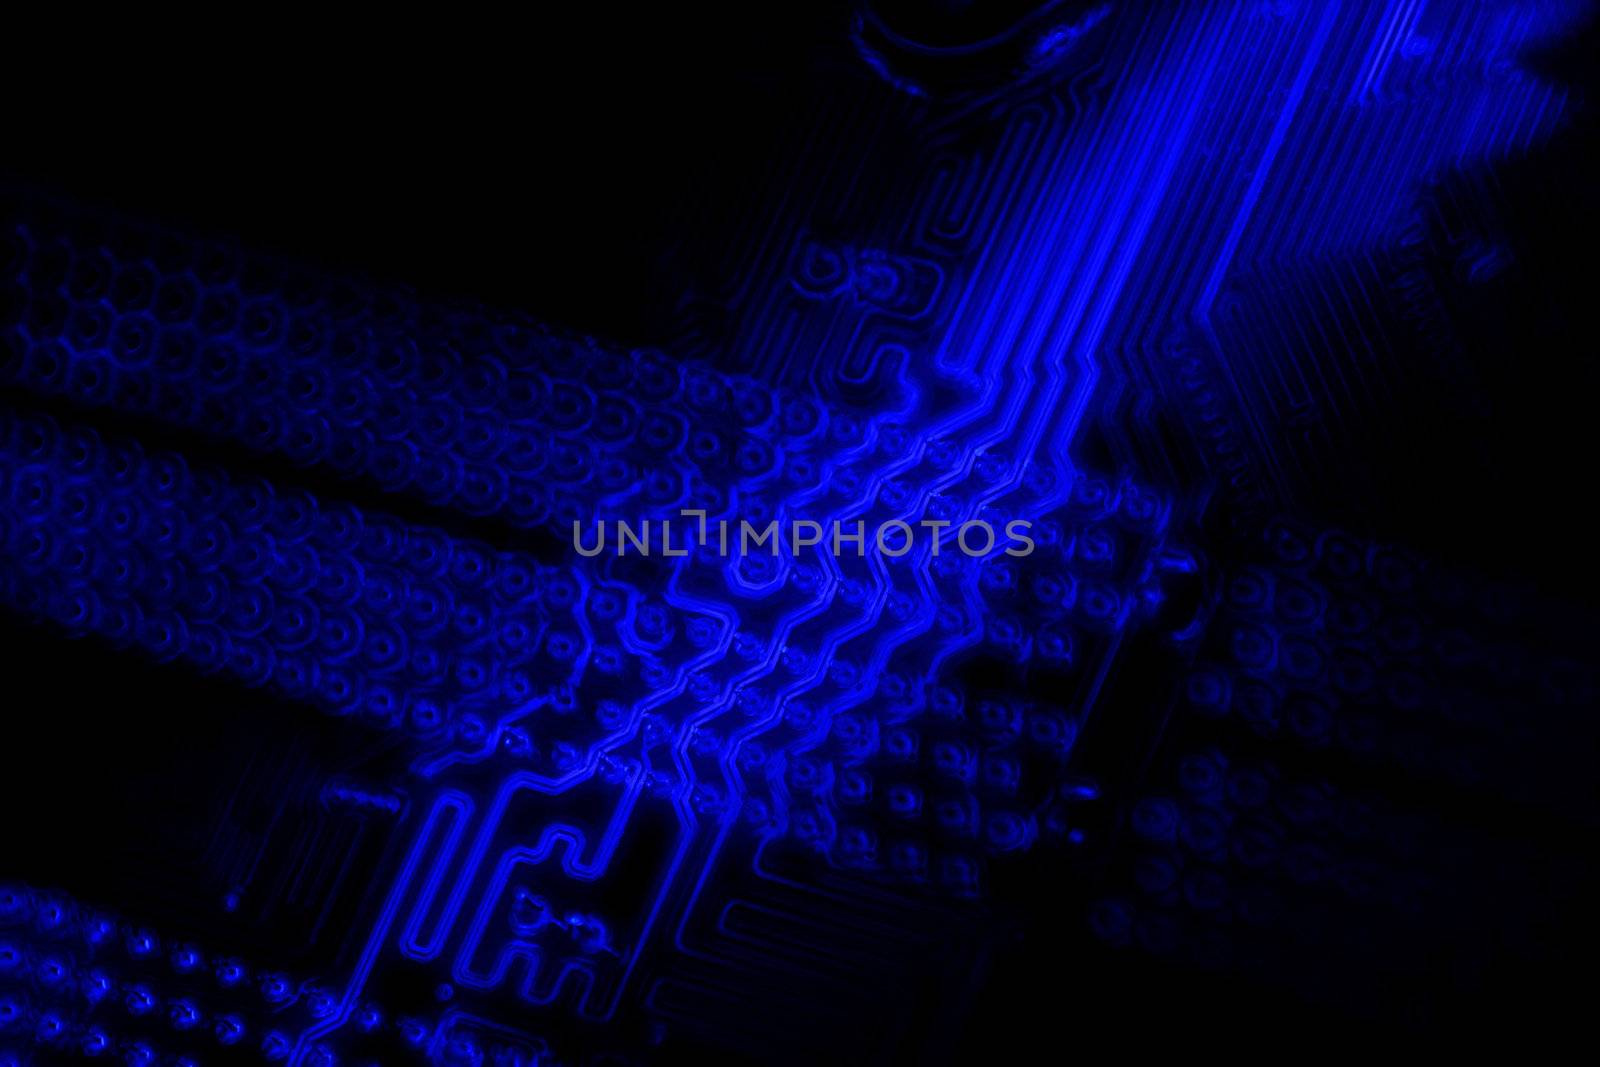 The underside of a motherboard, with a blue glow